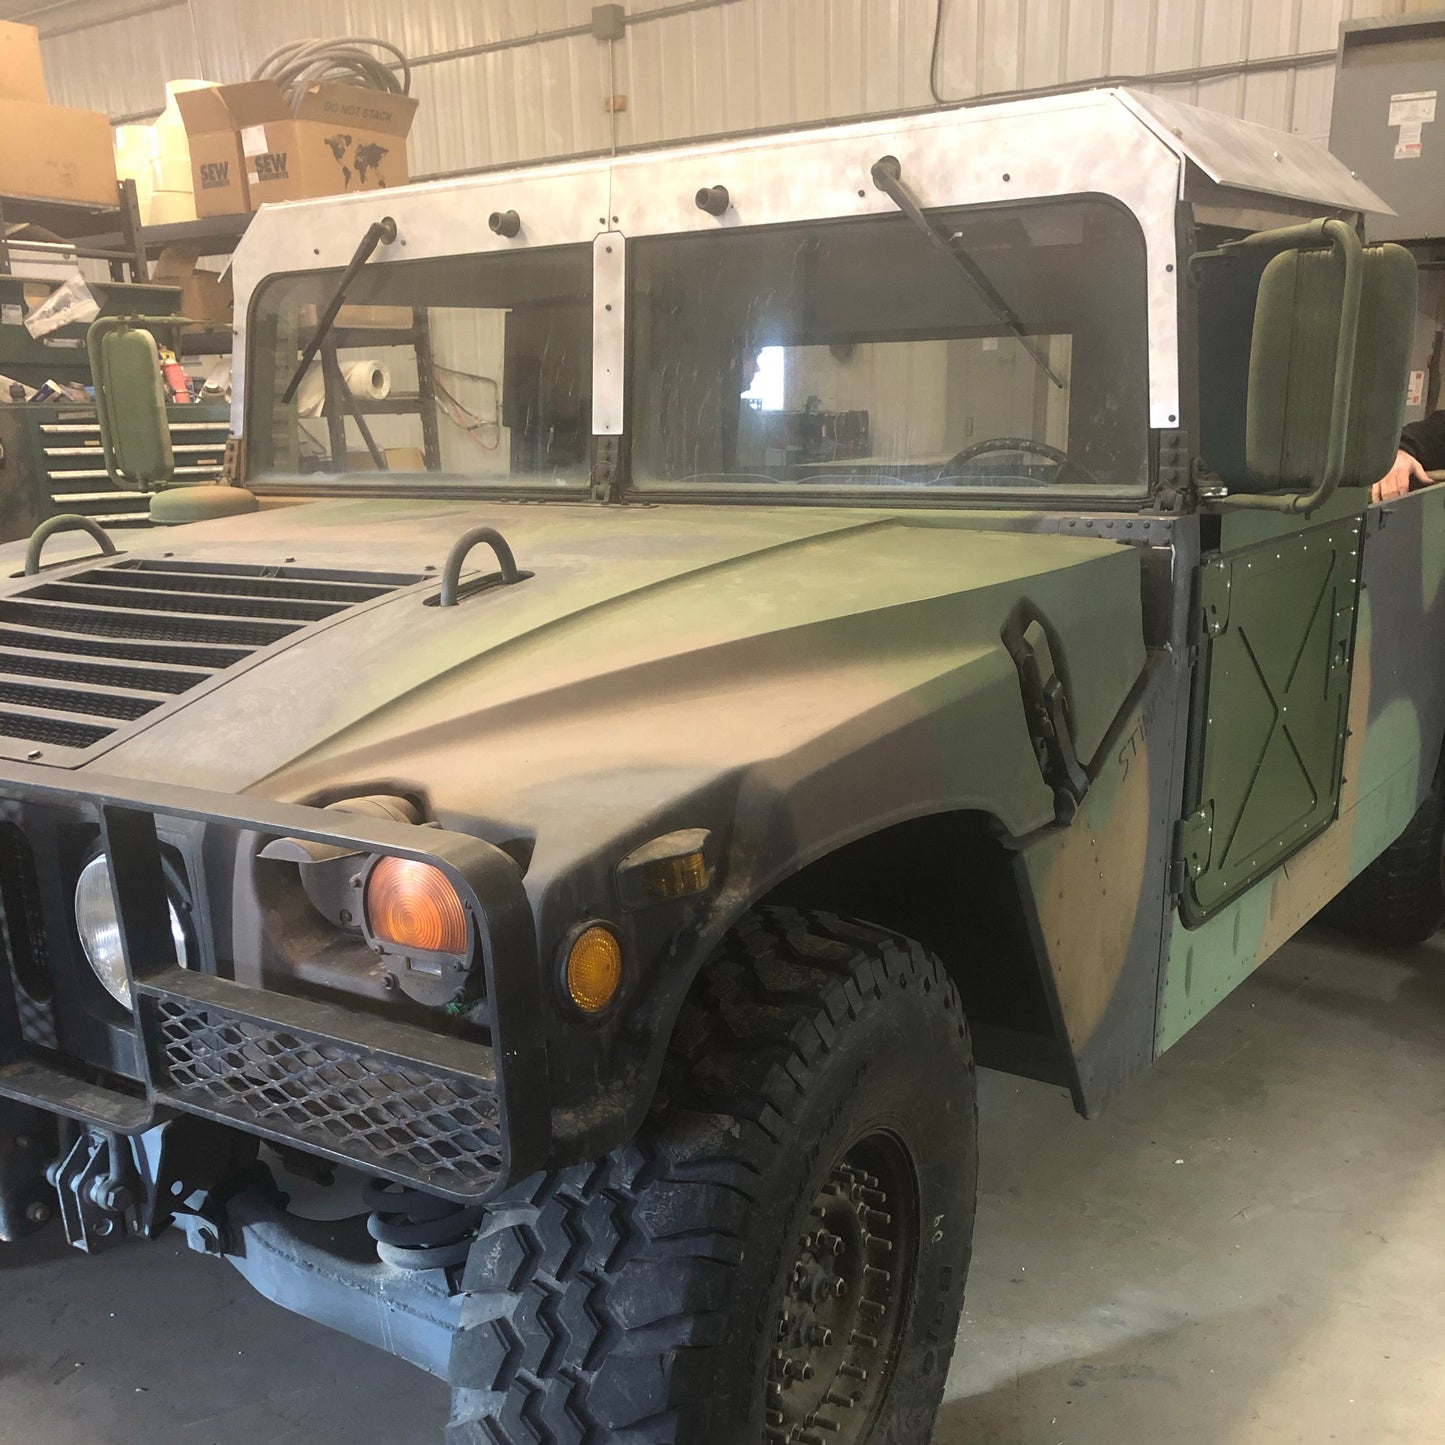 4 Man Extended Length Roof and Cab Extension for Military Humvee 1/4” Tactical Aluminum Roof